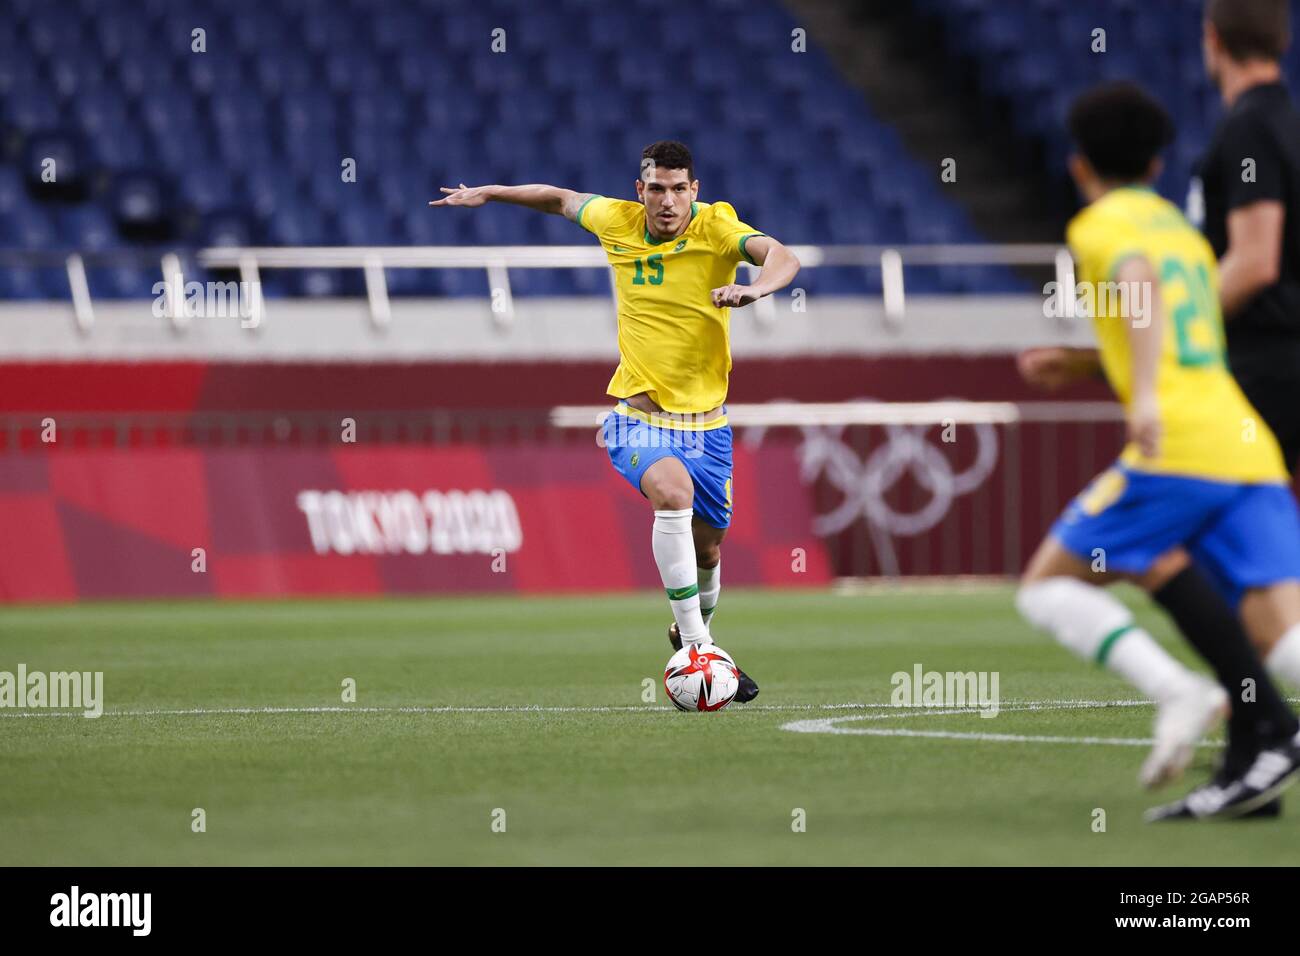 Tokyo, Japan. 31st July, 2021. T'QUIO, TO - 31.07.2021: TOKYO 2020 OLYMPIAD  TOKYO - Guilherme Arana do Brasil during the soccer game between Brazil and  Egypt at the Tokyo 2020 Olympic Games